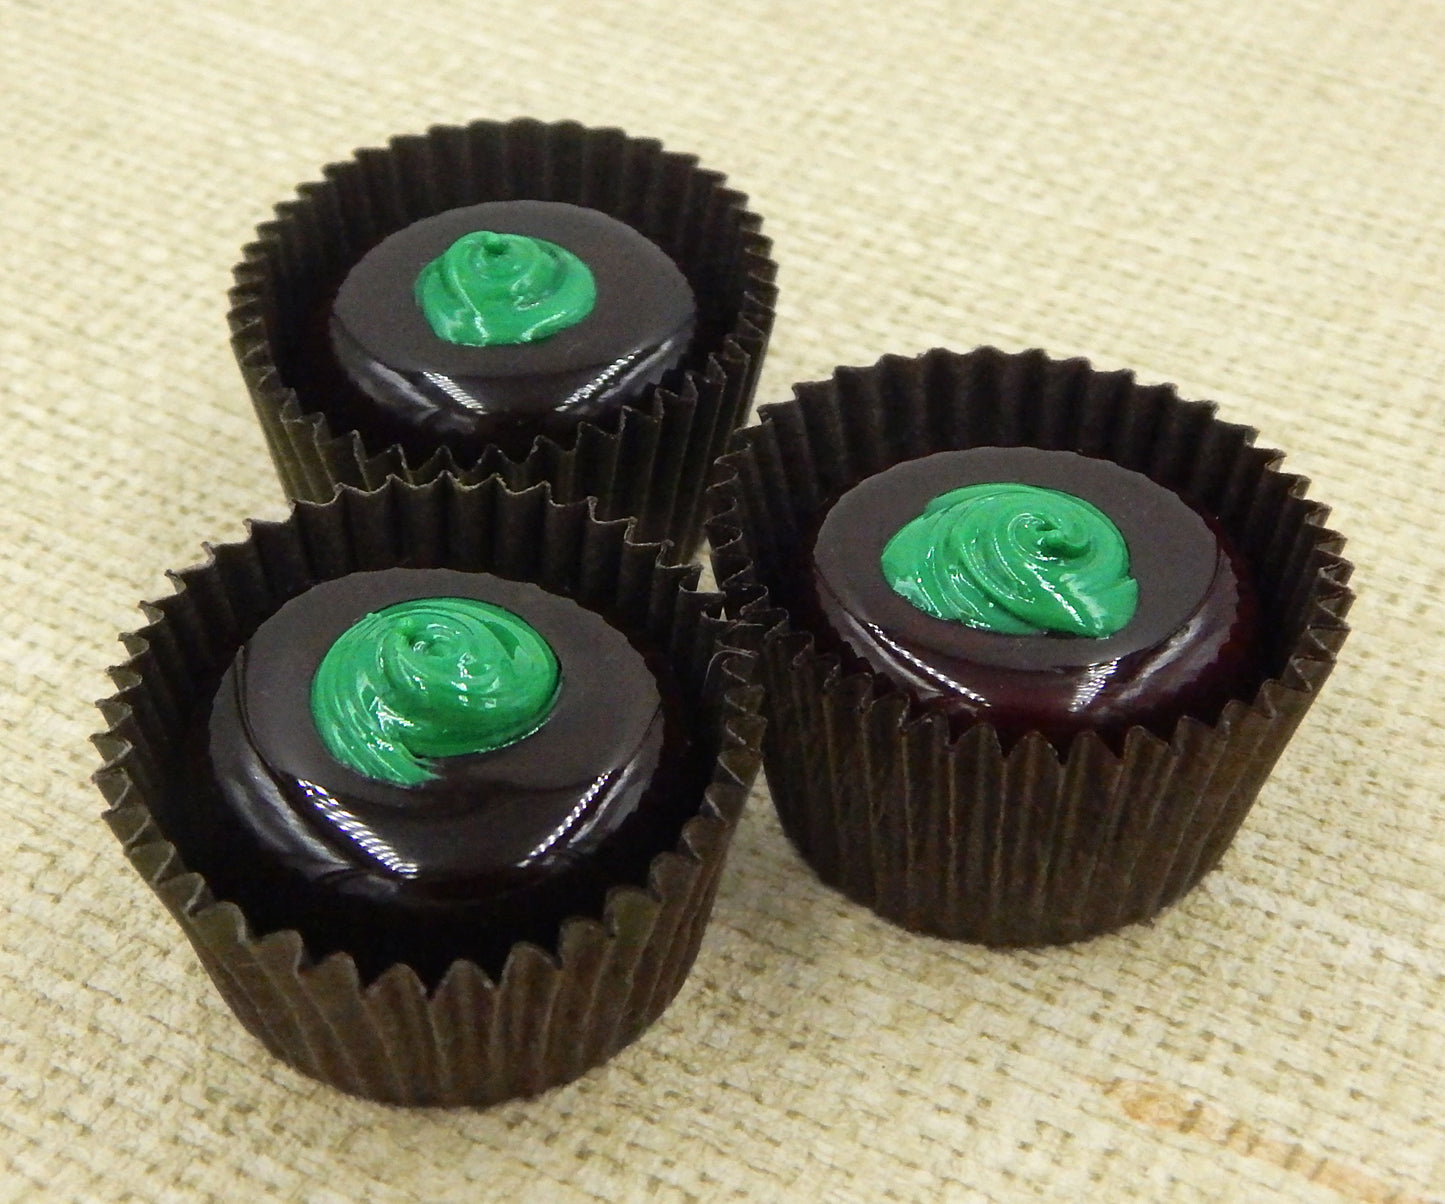 Chocolate with Wintergreen Dollop (11-081CN)